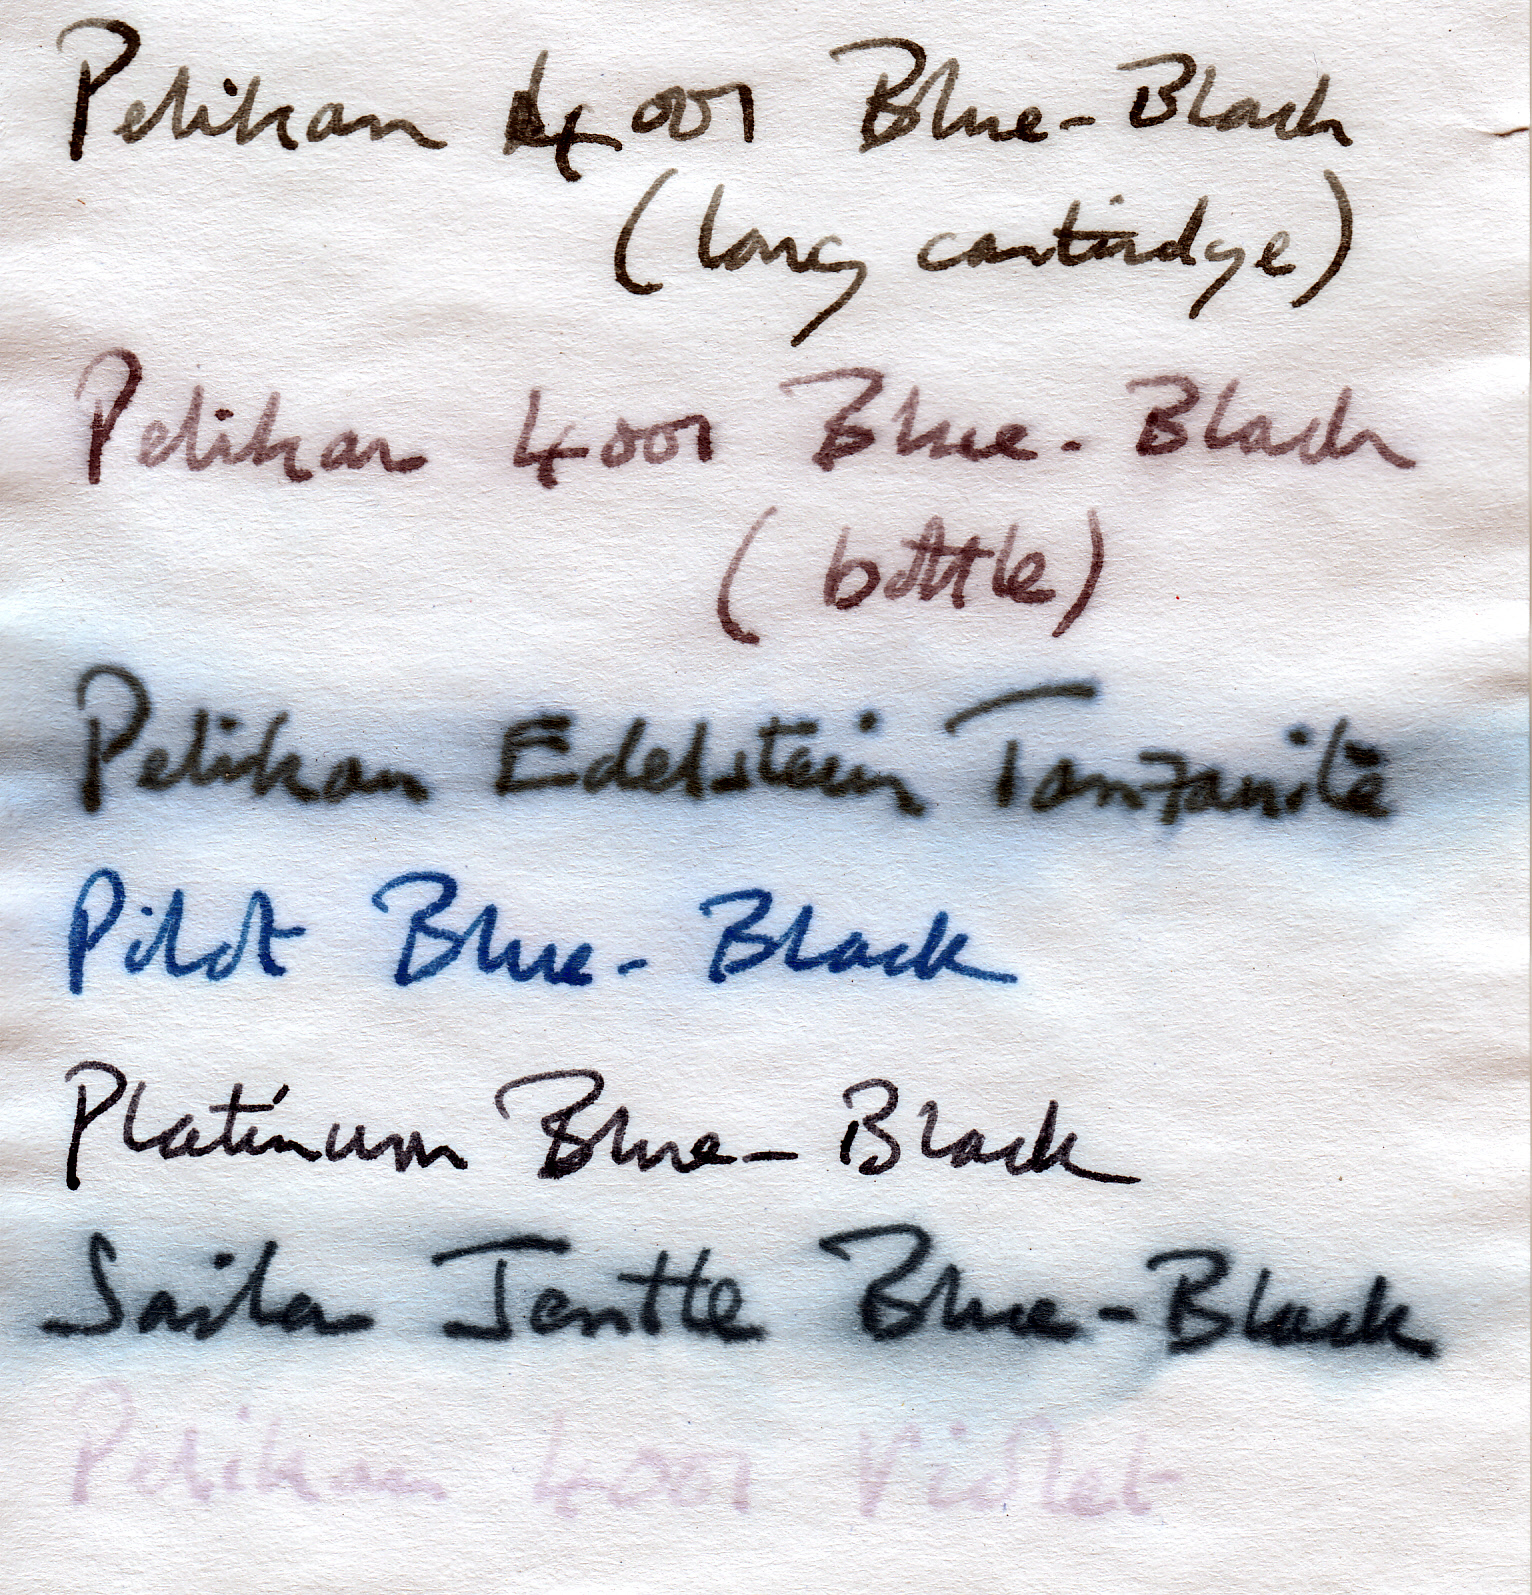 Fountain Pen Inks: Standard, Waterproof or Iron Gall? – Pure Pens